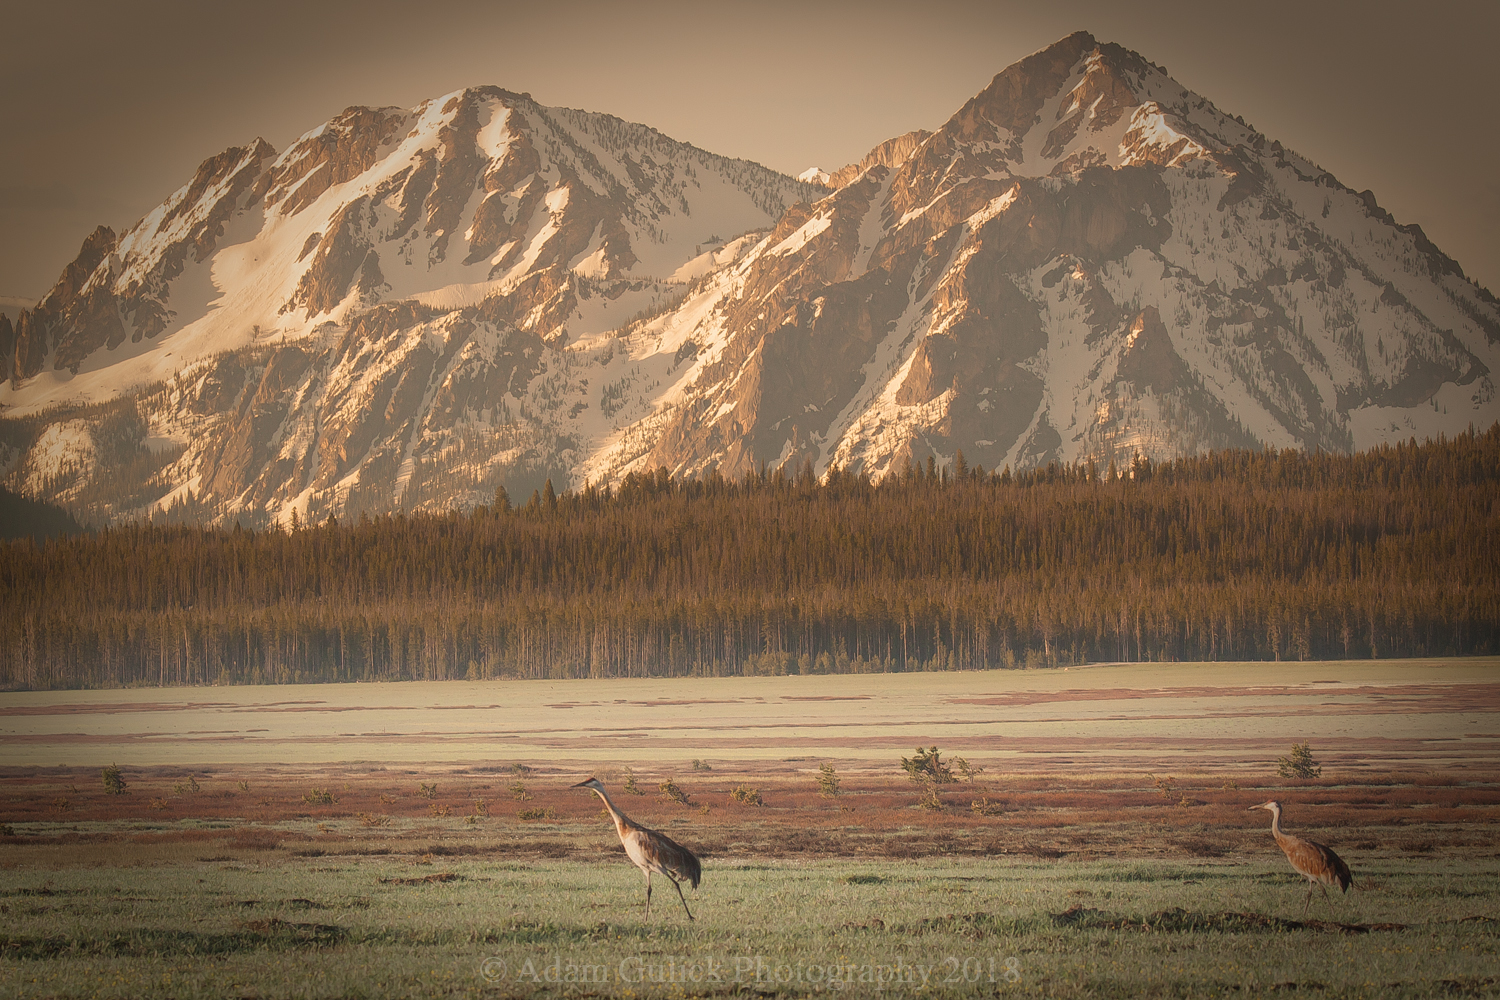 The Sawtooth mountains in Stanley, Idaho